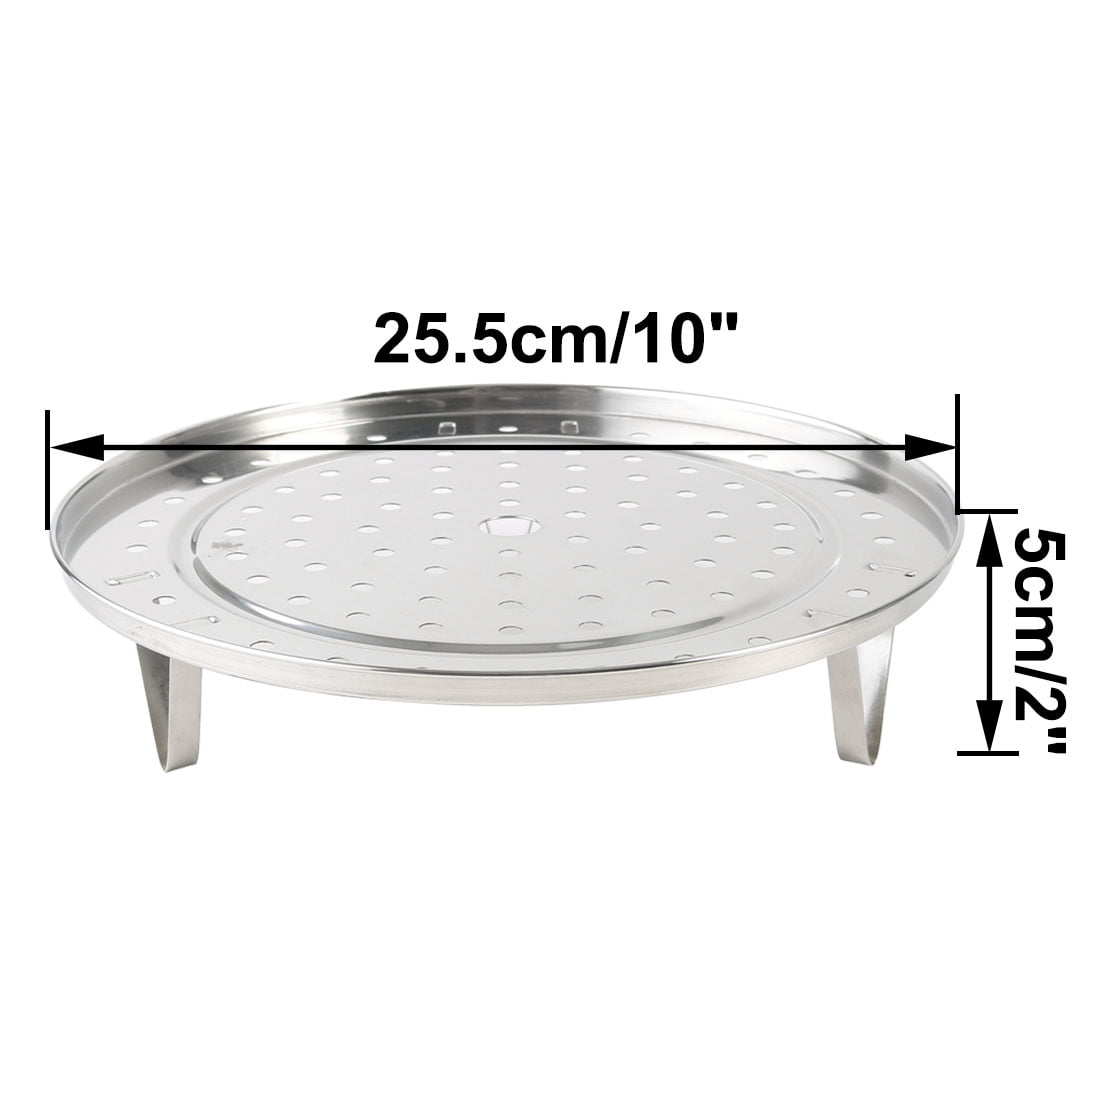 Aluminium Steamer Stand Food Cooking Cookware Steaming Plate Rack With 3 Legs